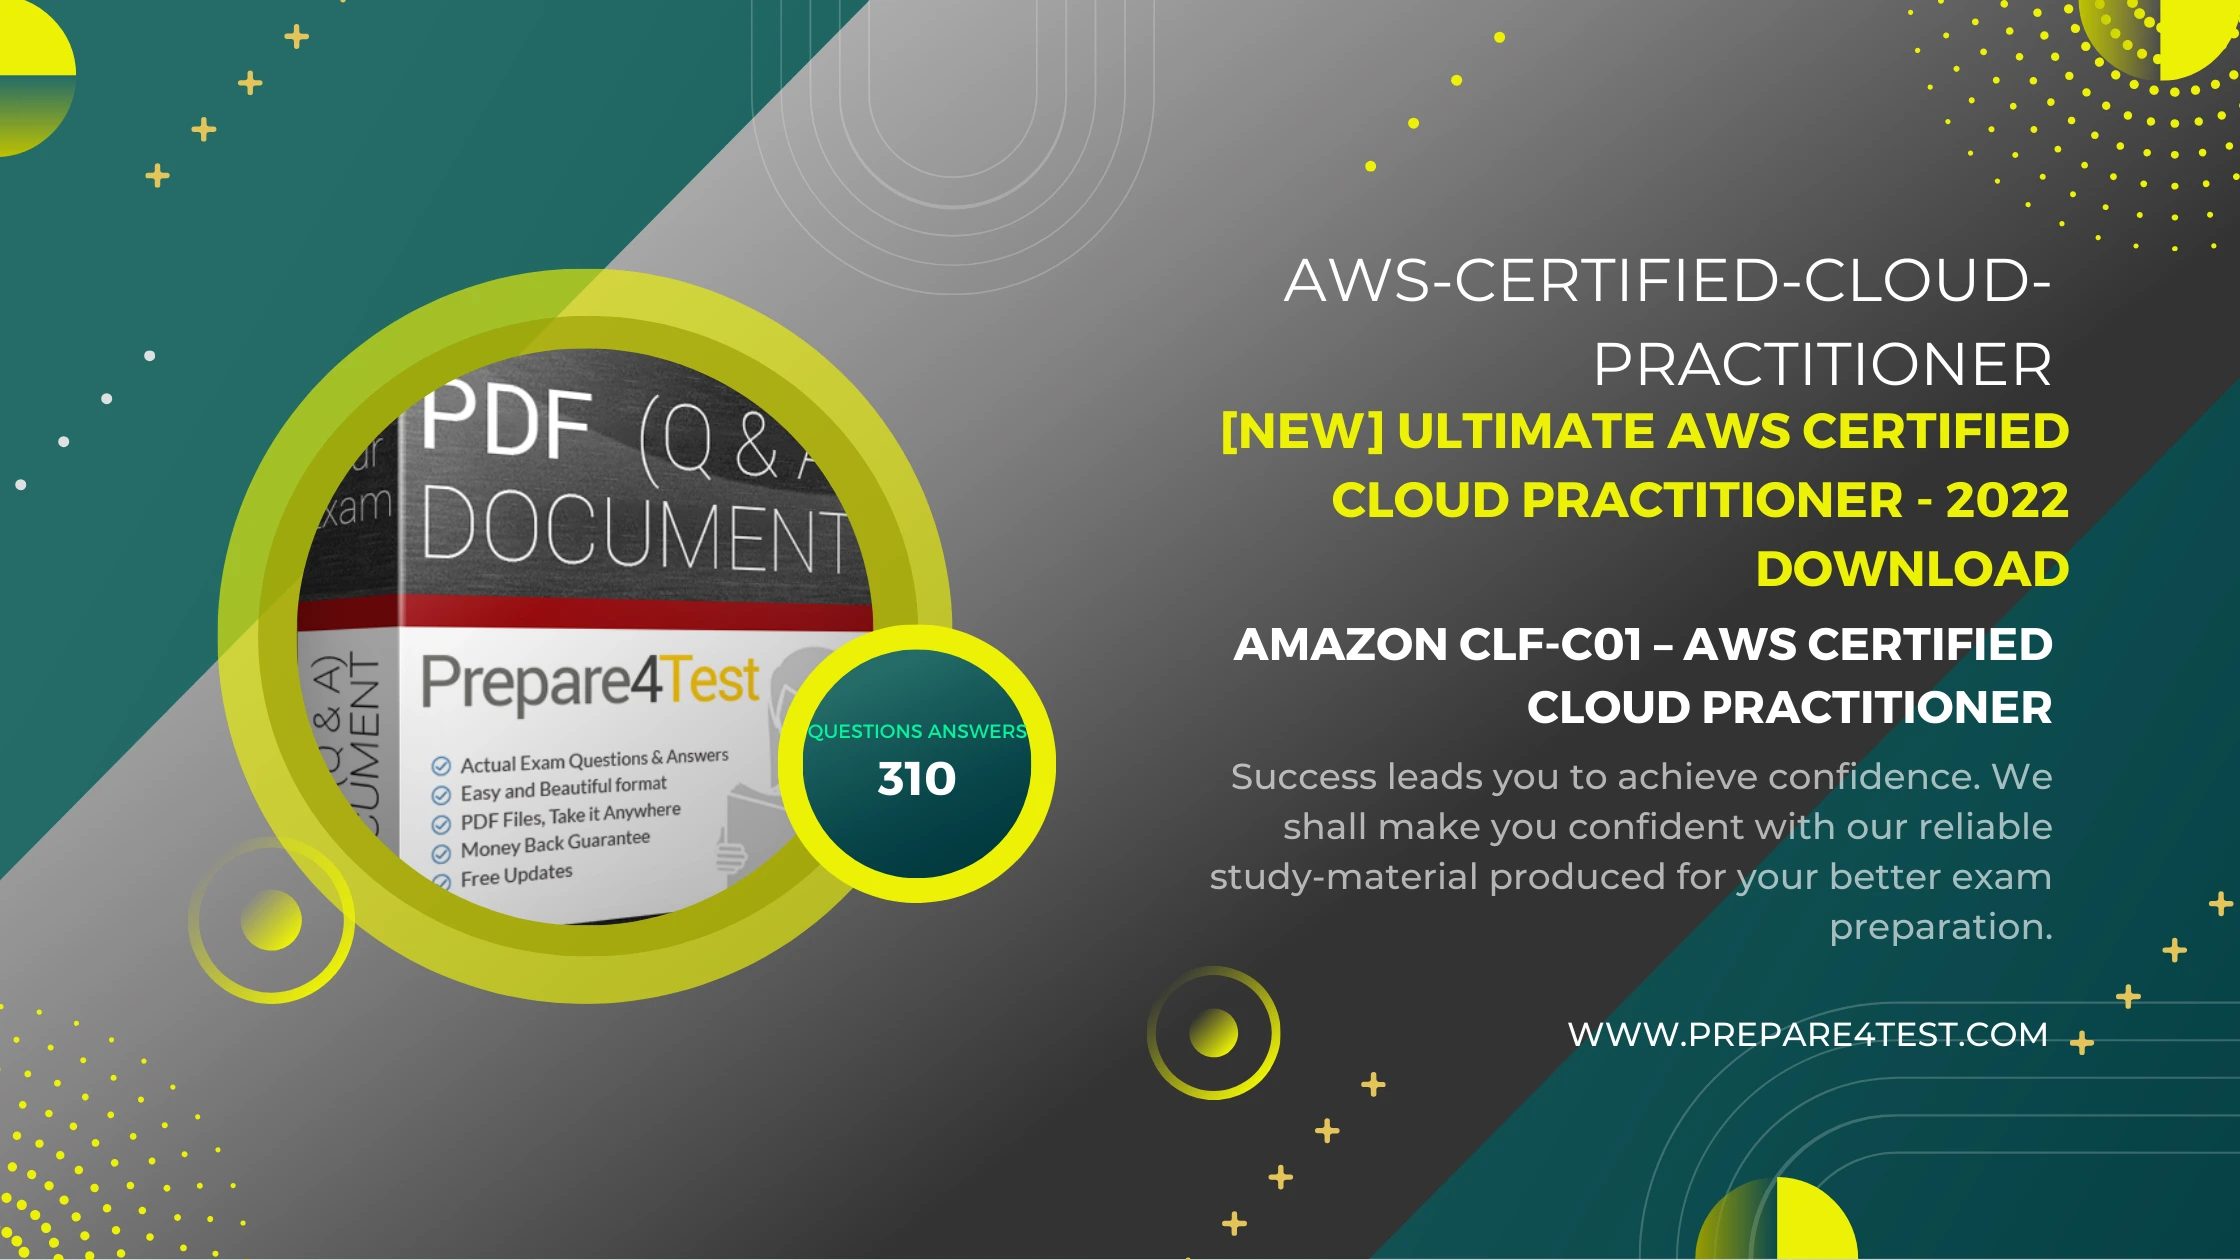 [NEW] Ultimate AWS Certified Cloud Practitioner - 2022 Download guarantee